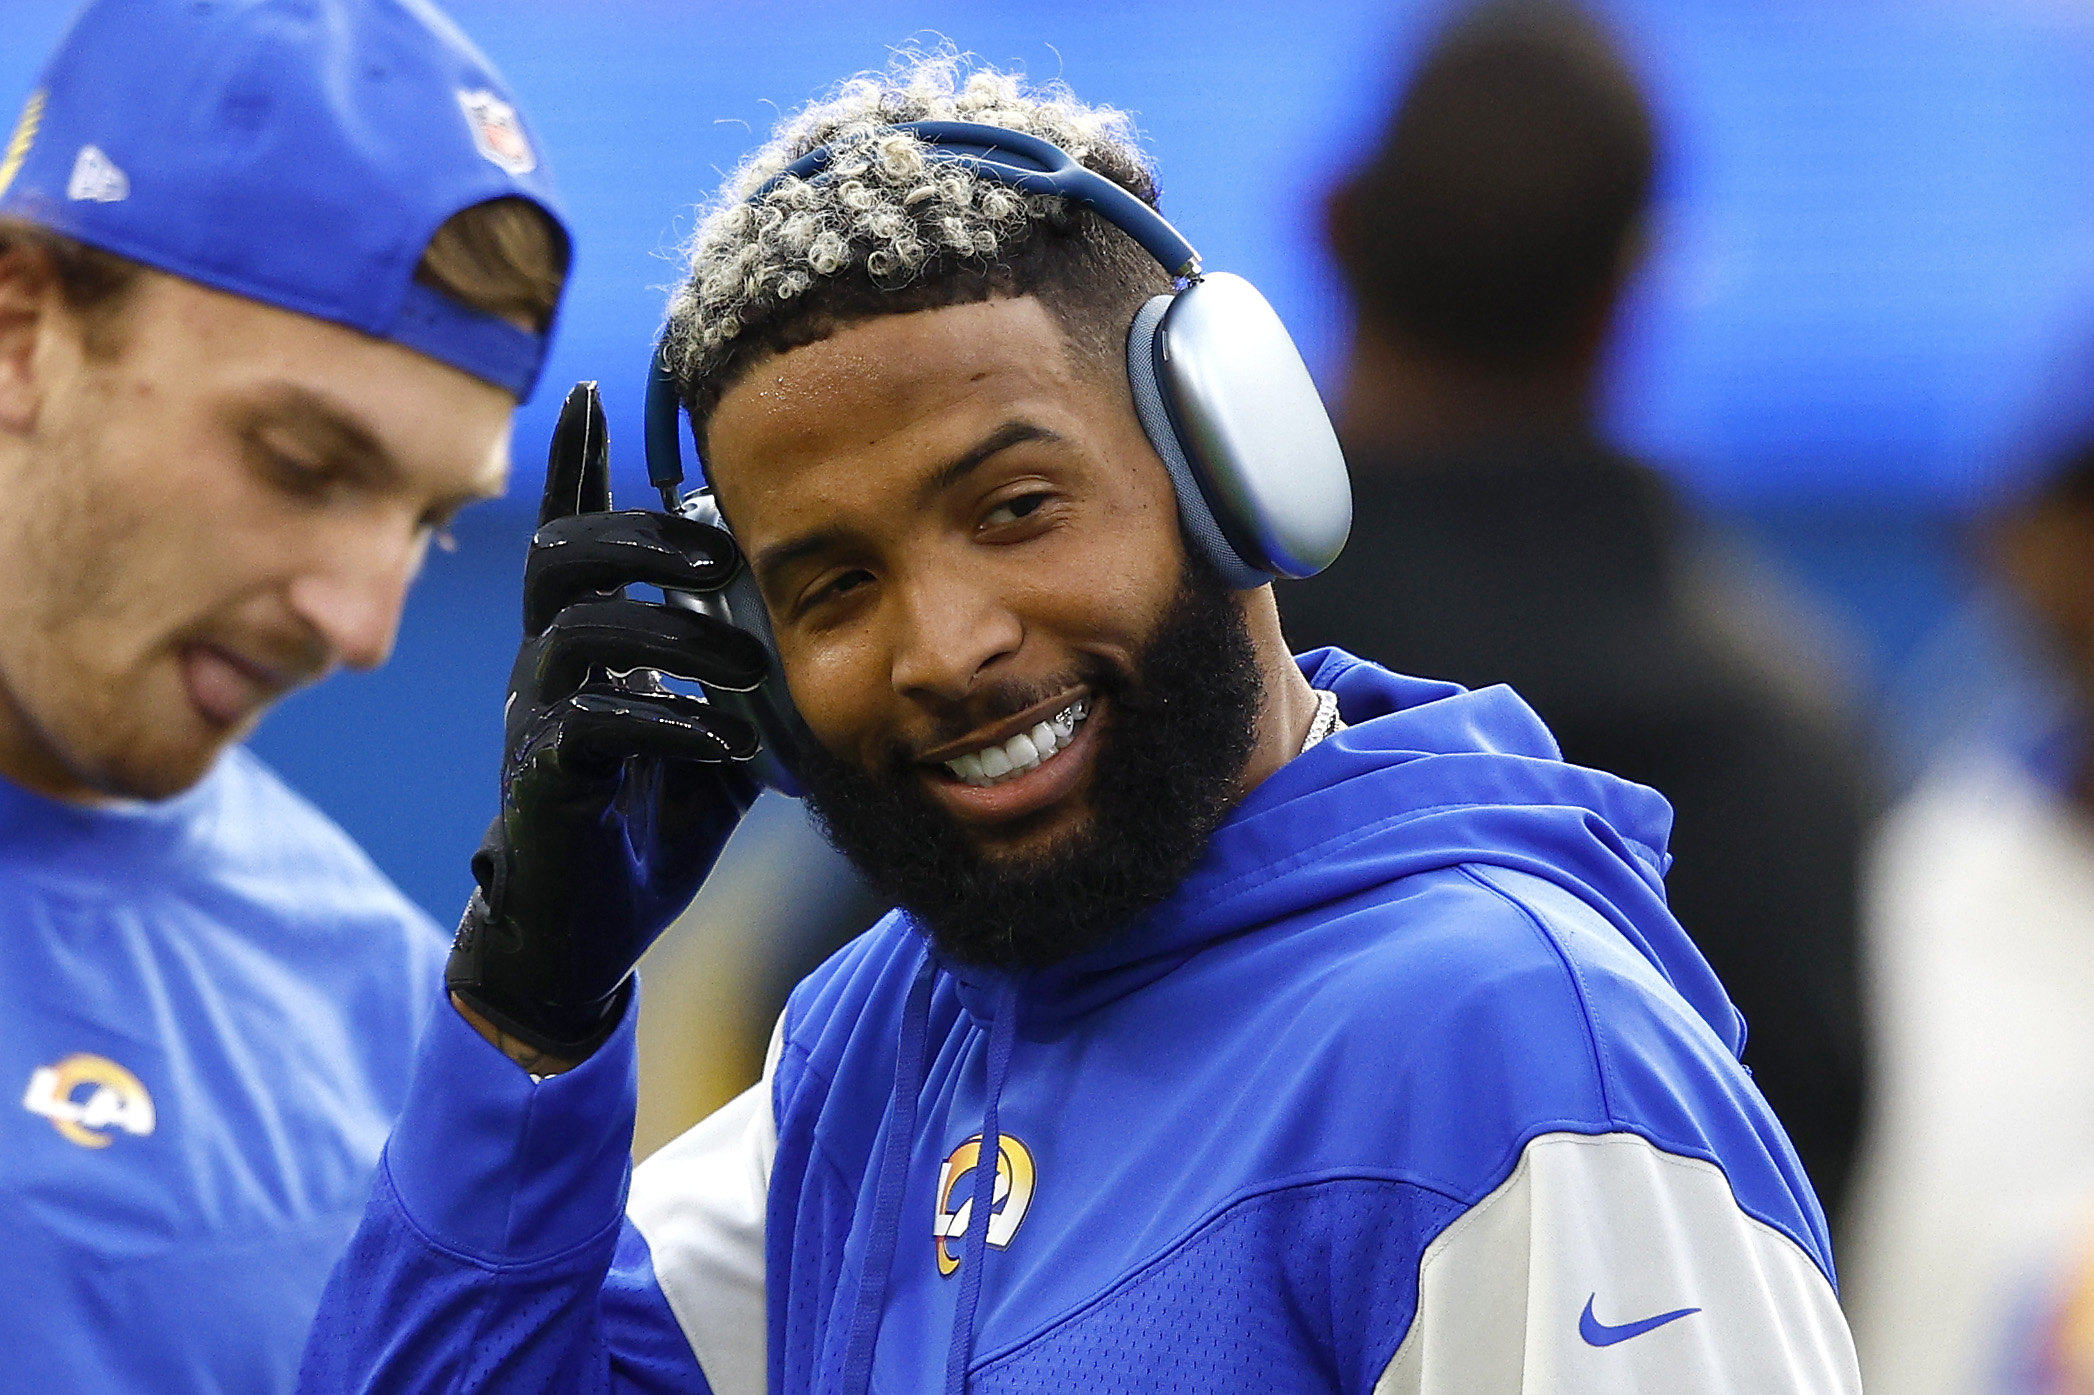 drakes bet on odell